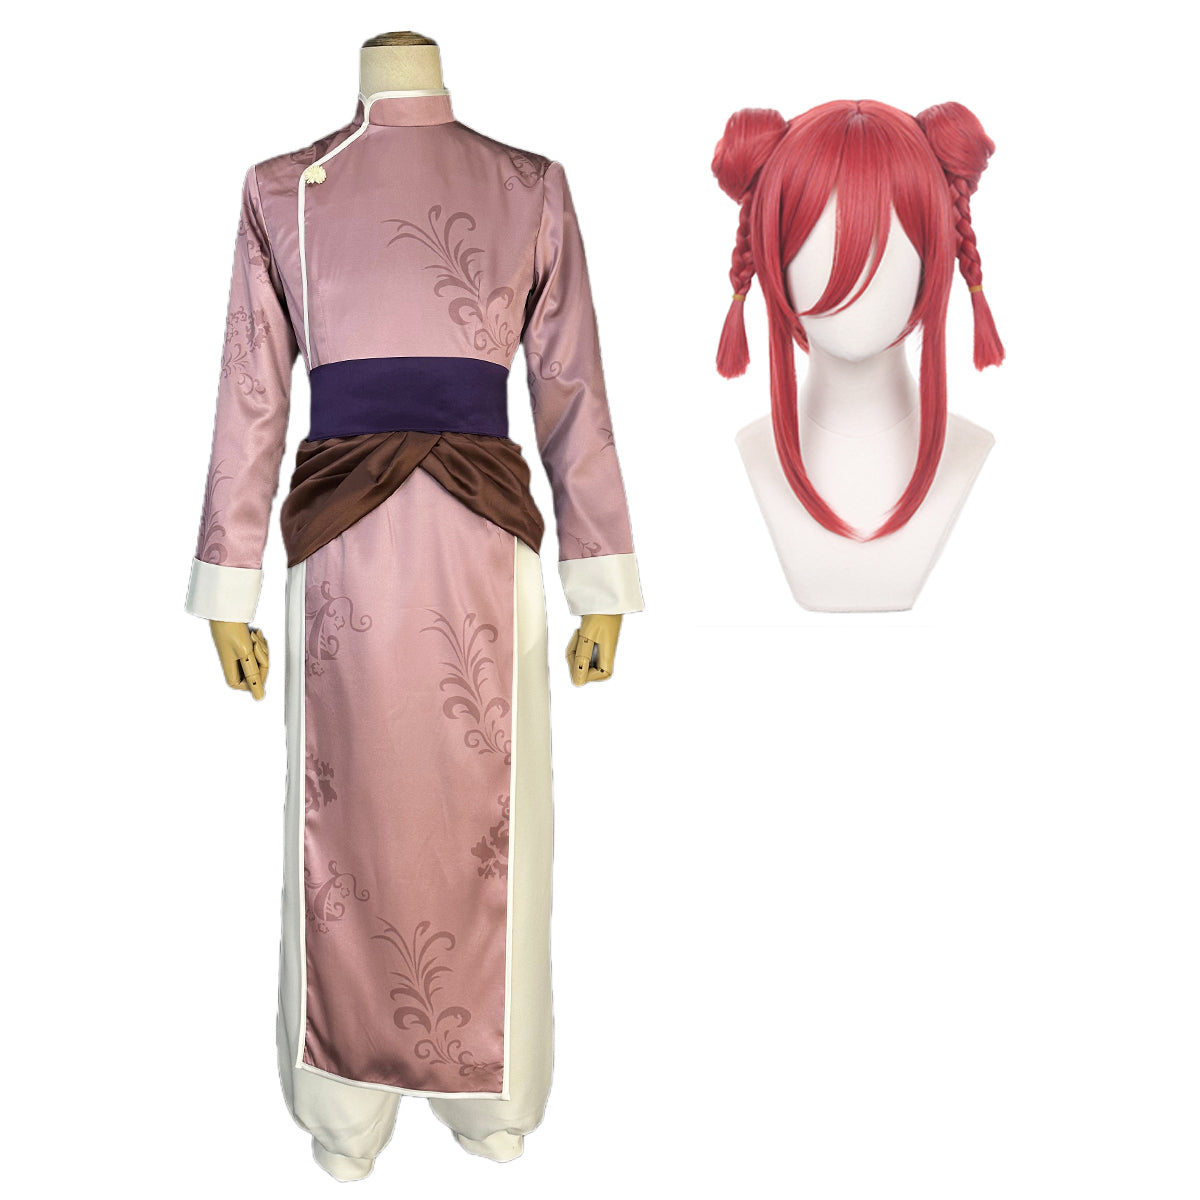 HOLOUN Blue Lock Anime Chigiri Cosplay China Costume kung Fu Tang Suit Wig Rose Net Sythetic Fibers Adjustable Size Gift Party